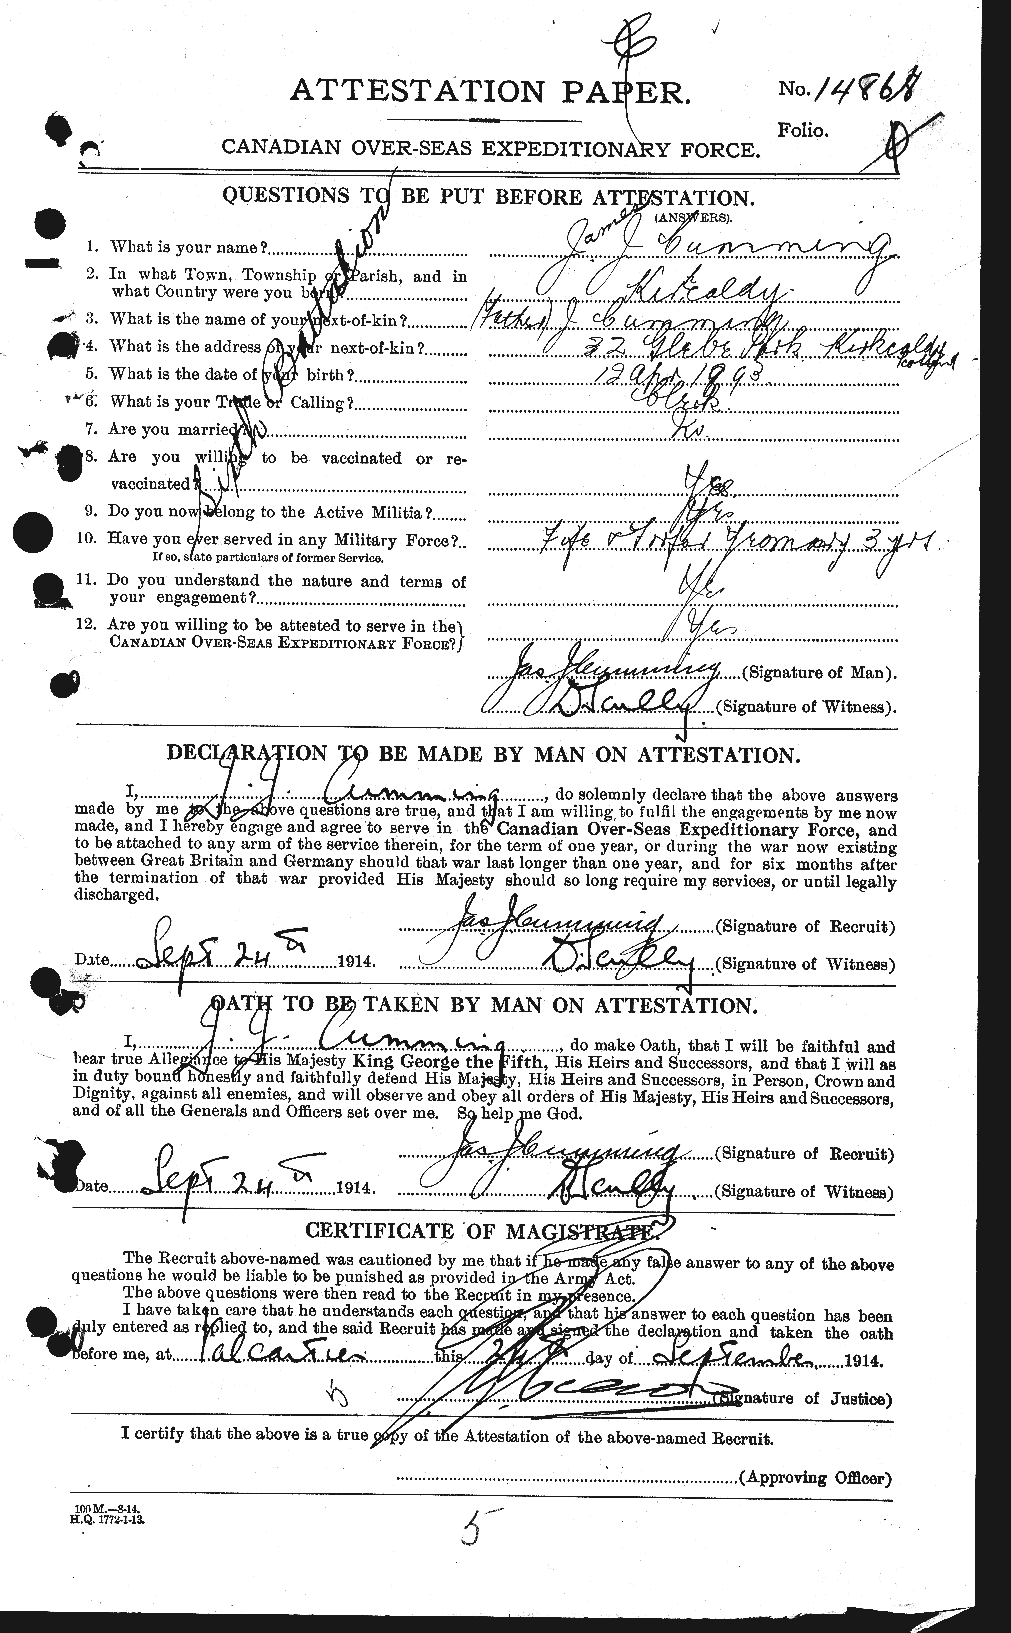 Personnel Records of the First World War - CEF 071086a